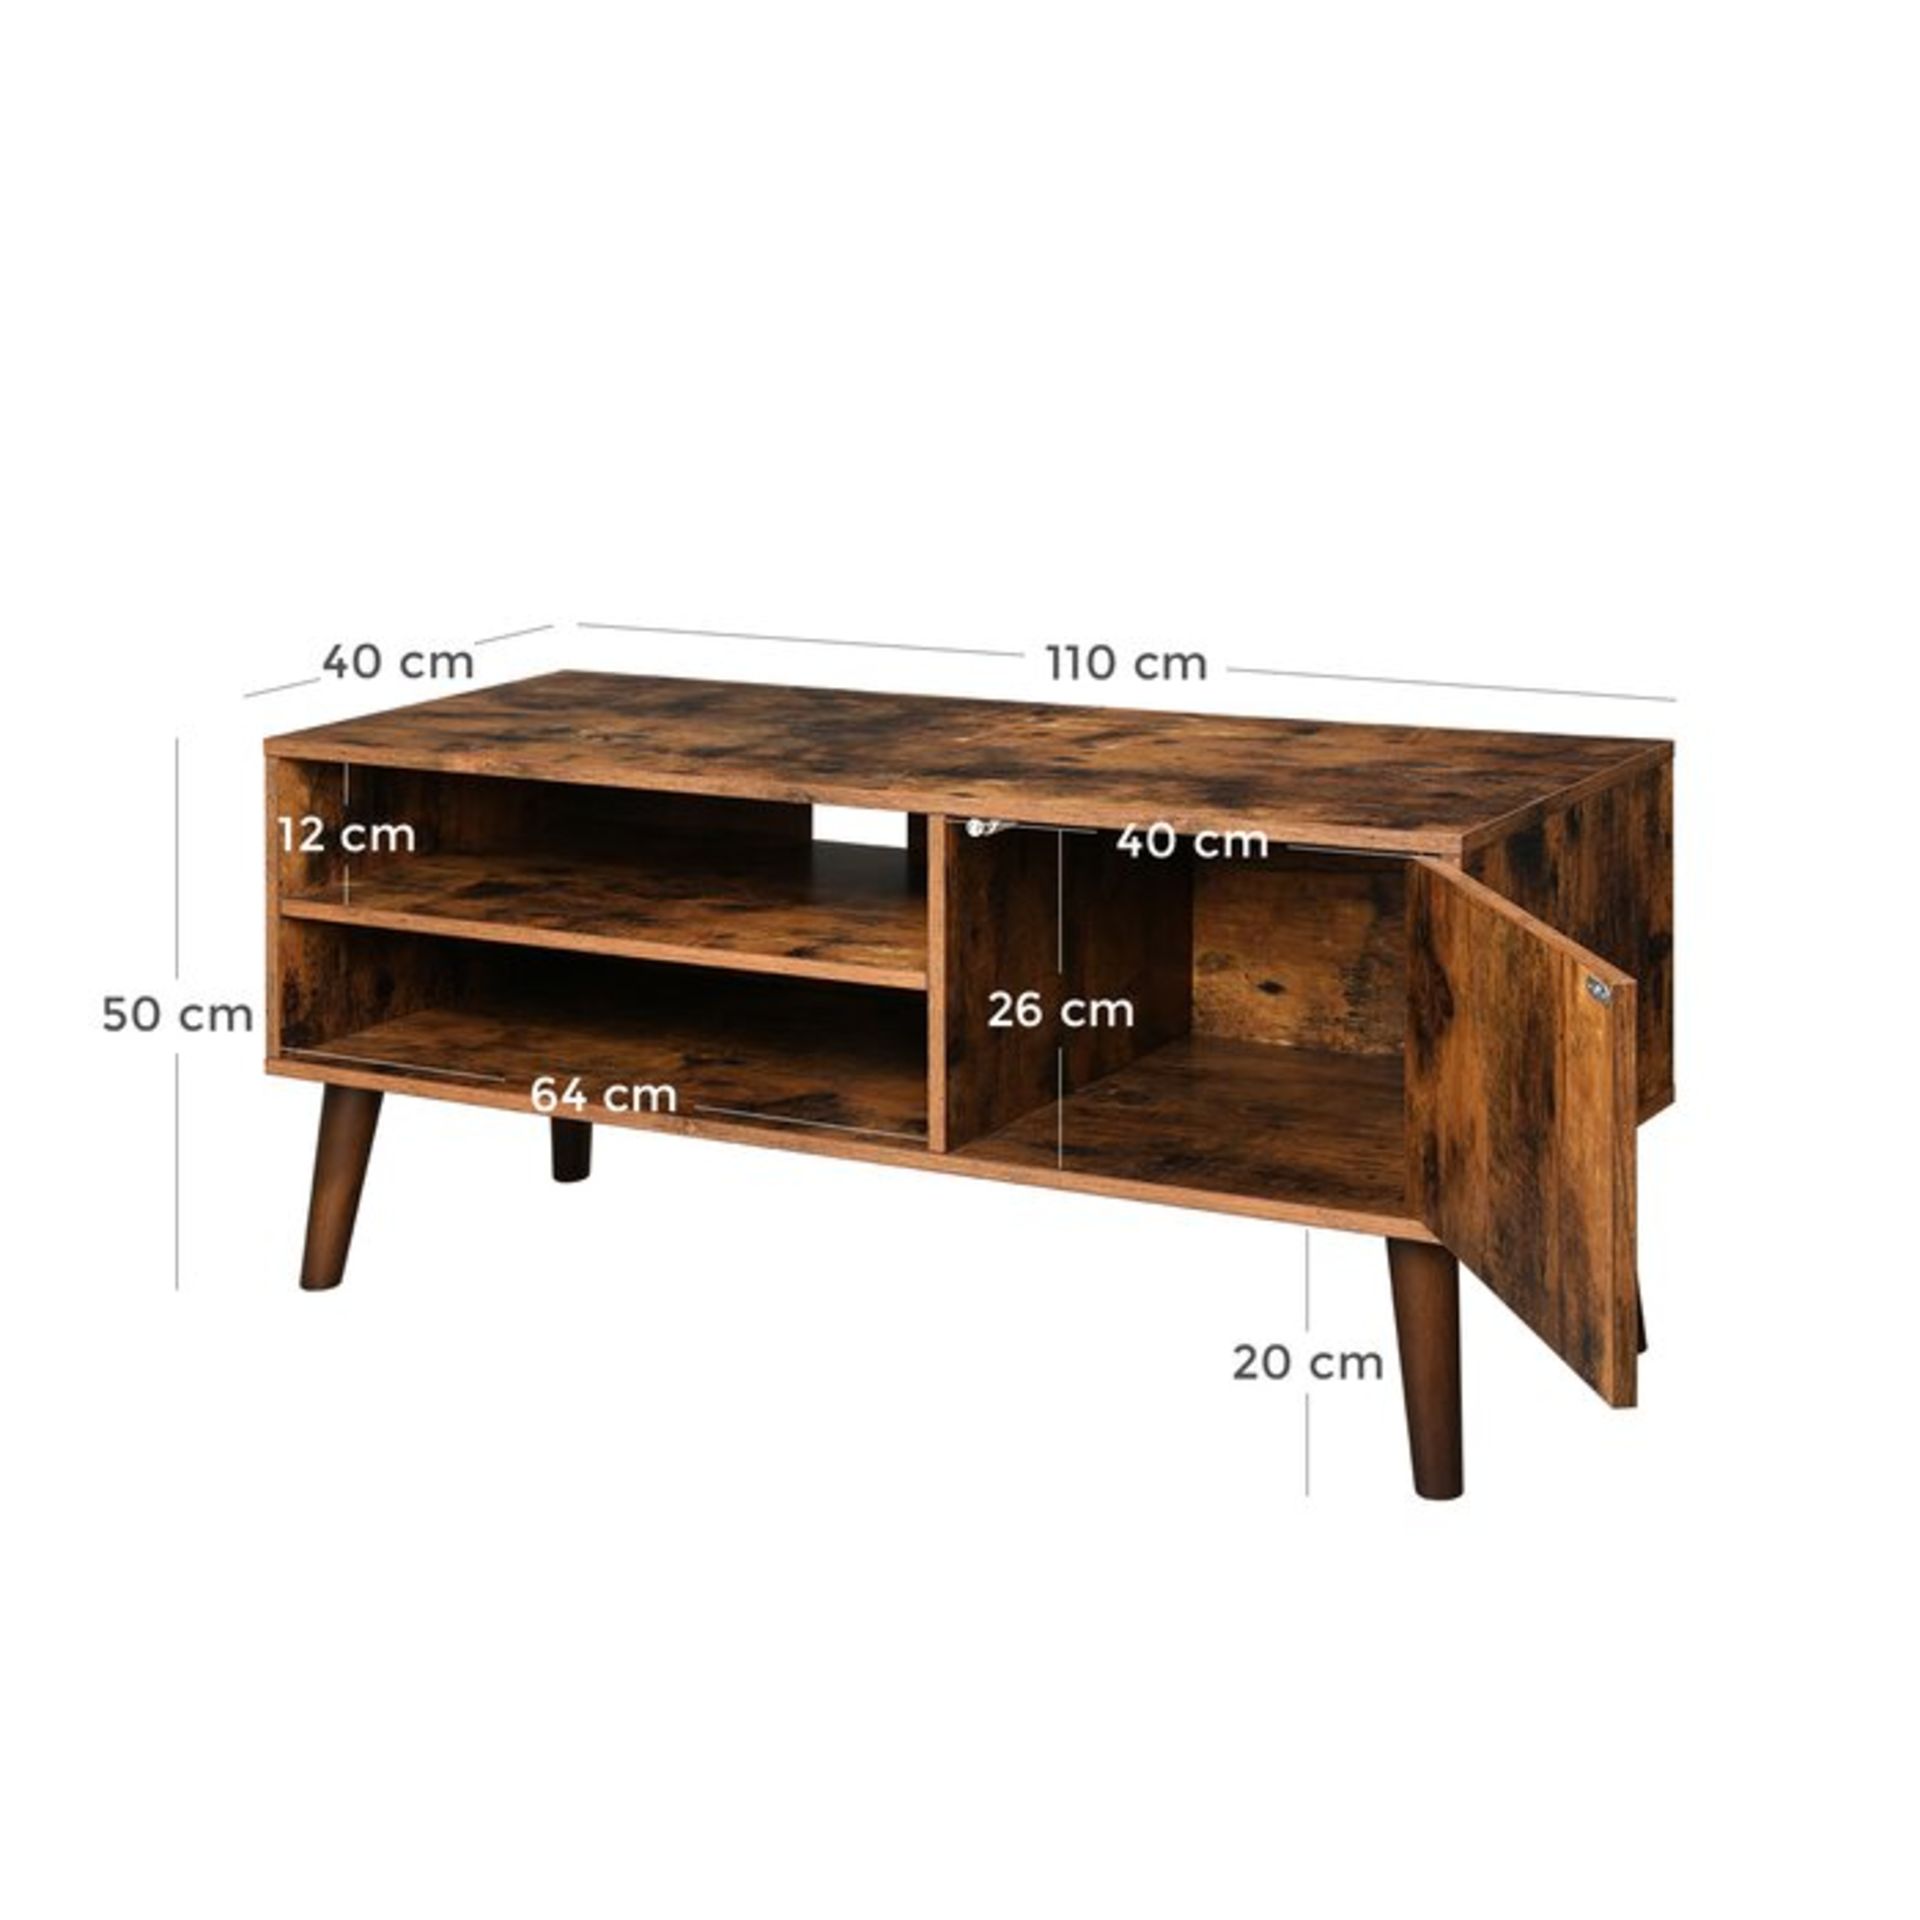 Bliss TV Stand for TVs up to 43" - RRP £97.99 - Image 3 of 3